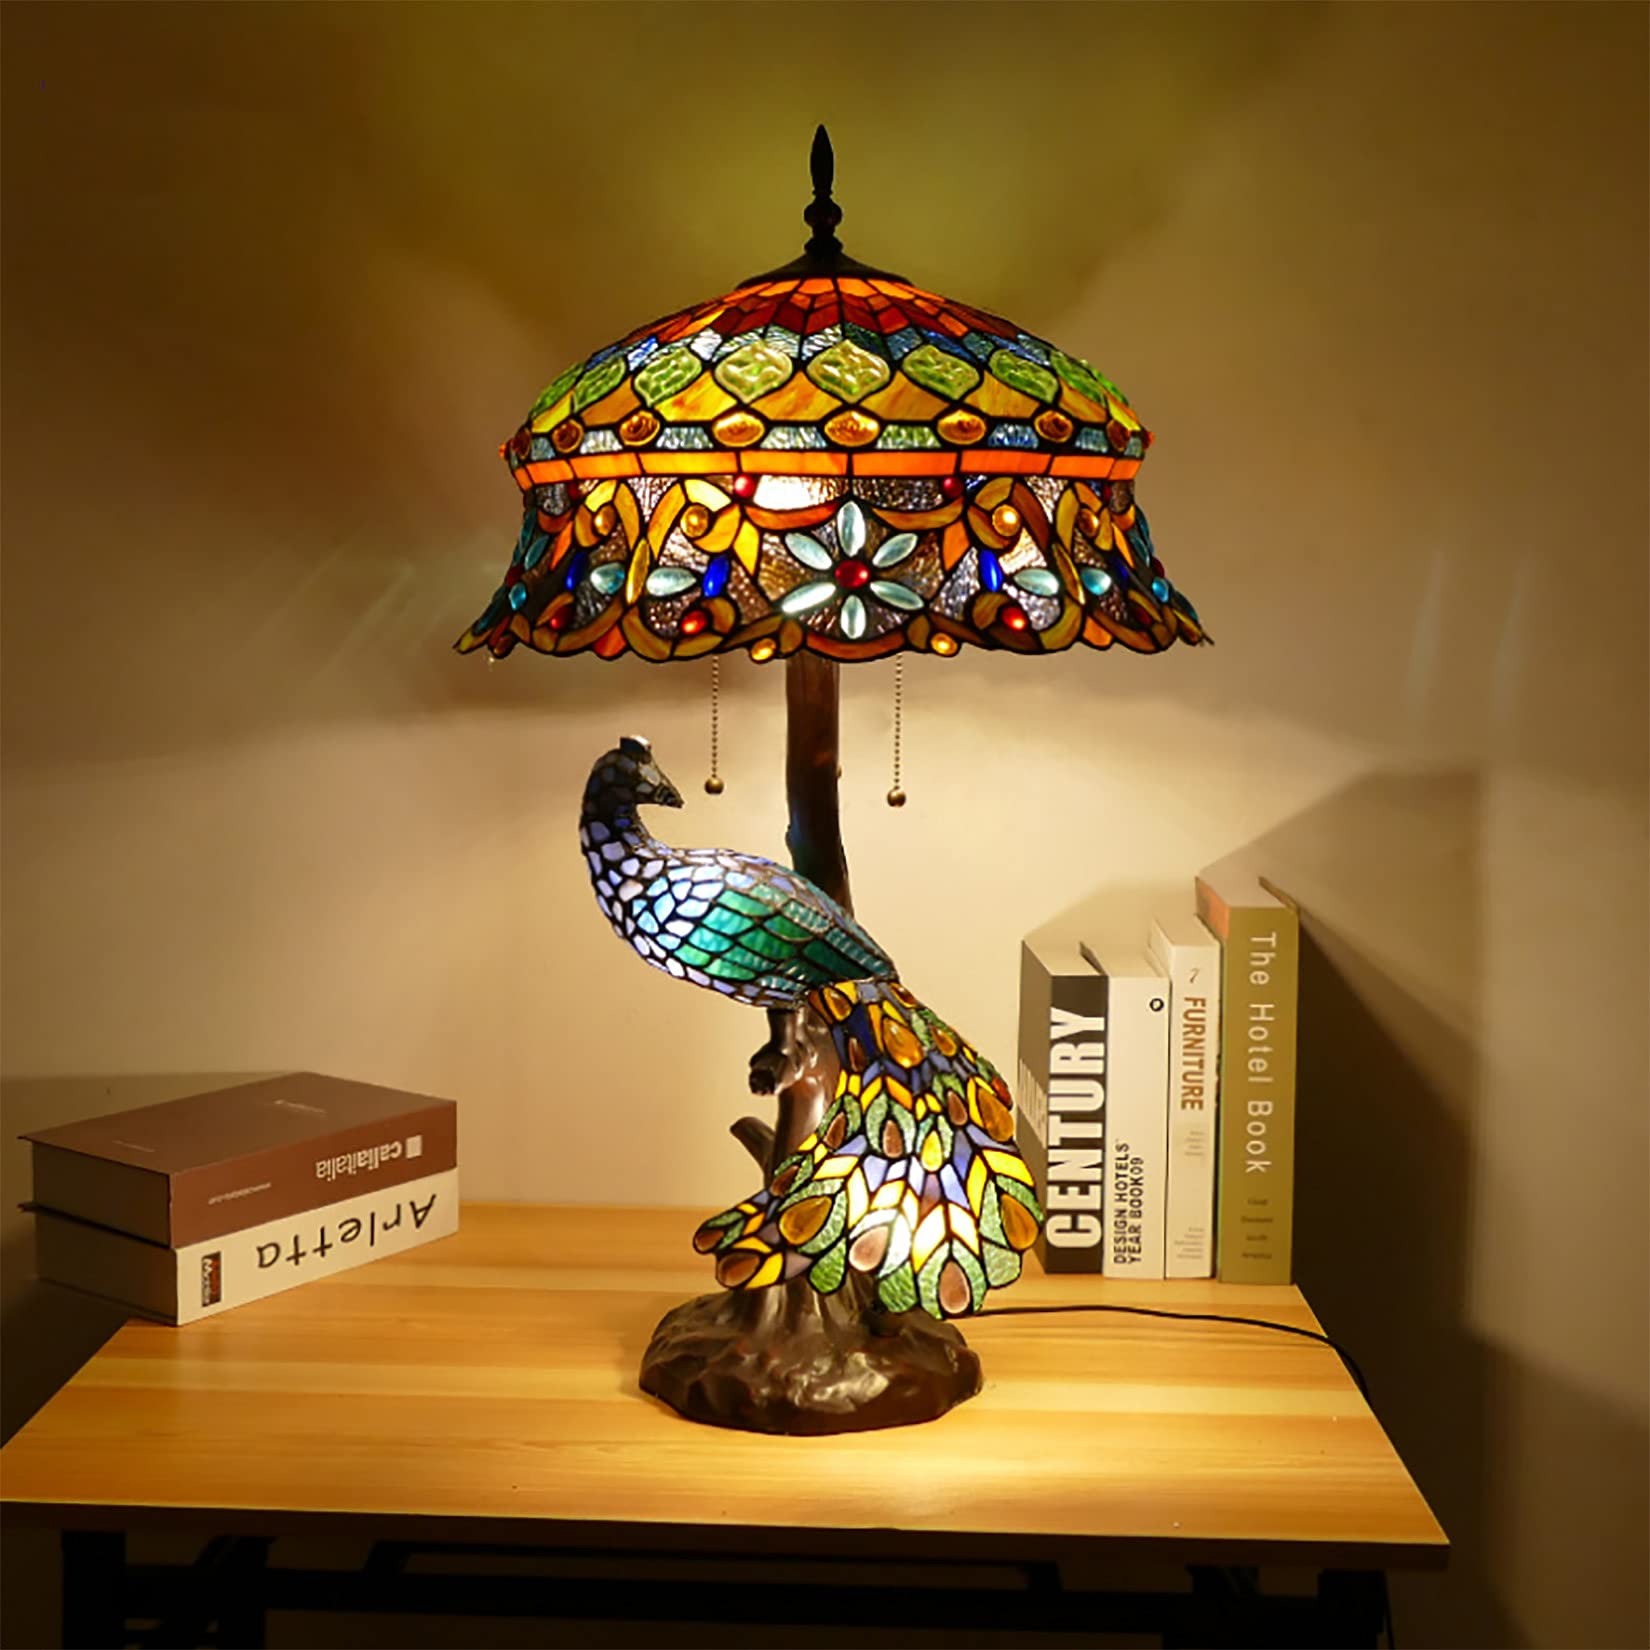 How To Make A Stained Glass Lamp Shade